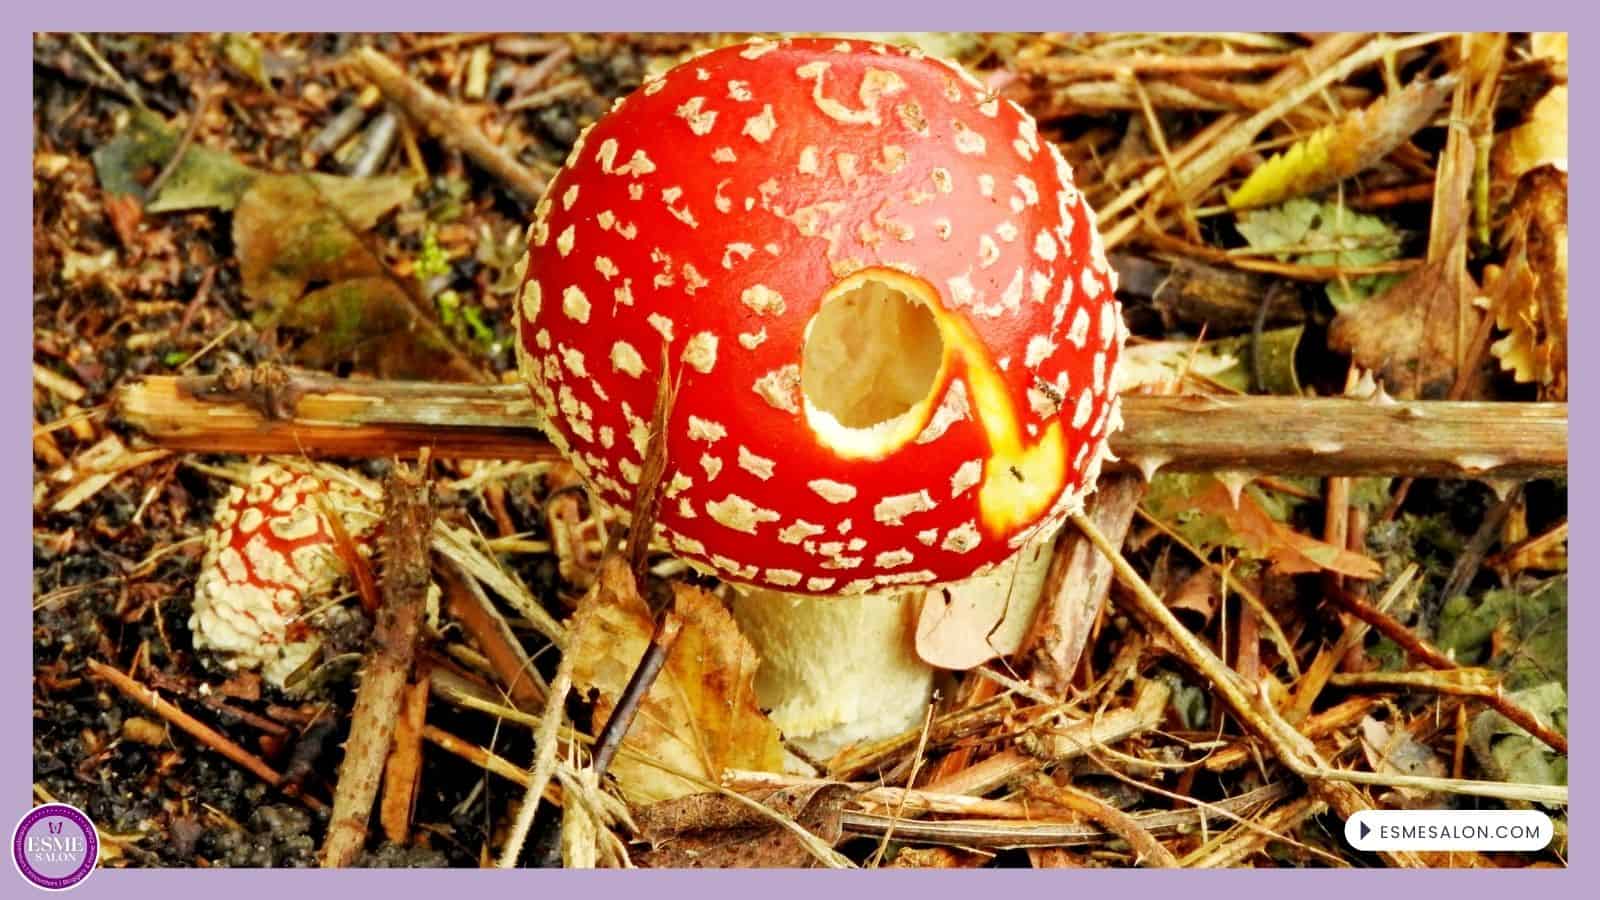 an image of a Fly Agaric Mushroom - very poisonous